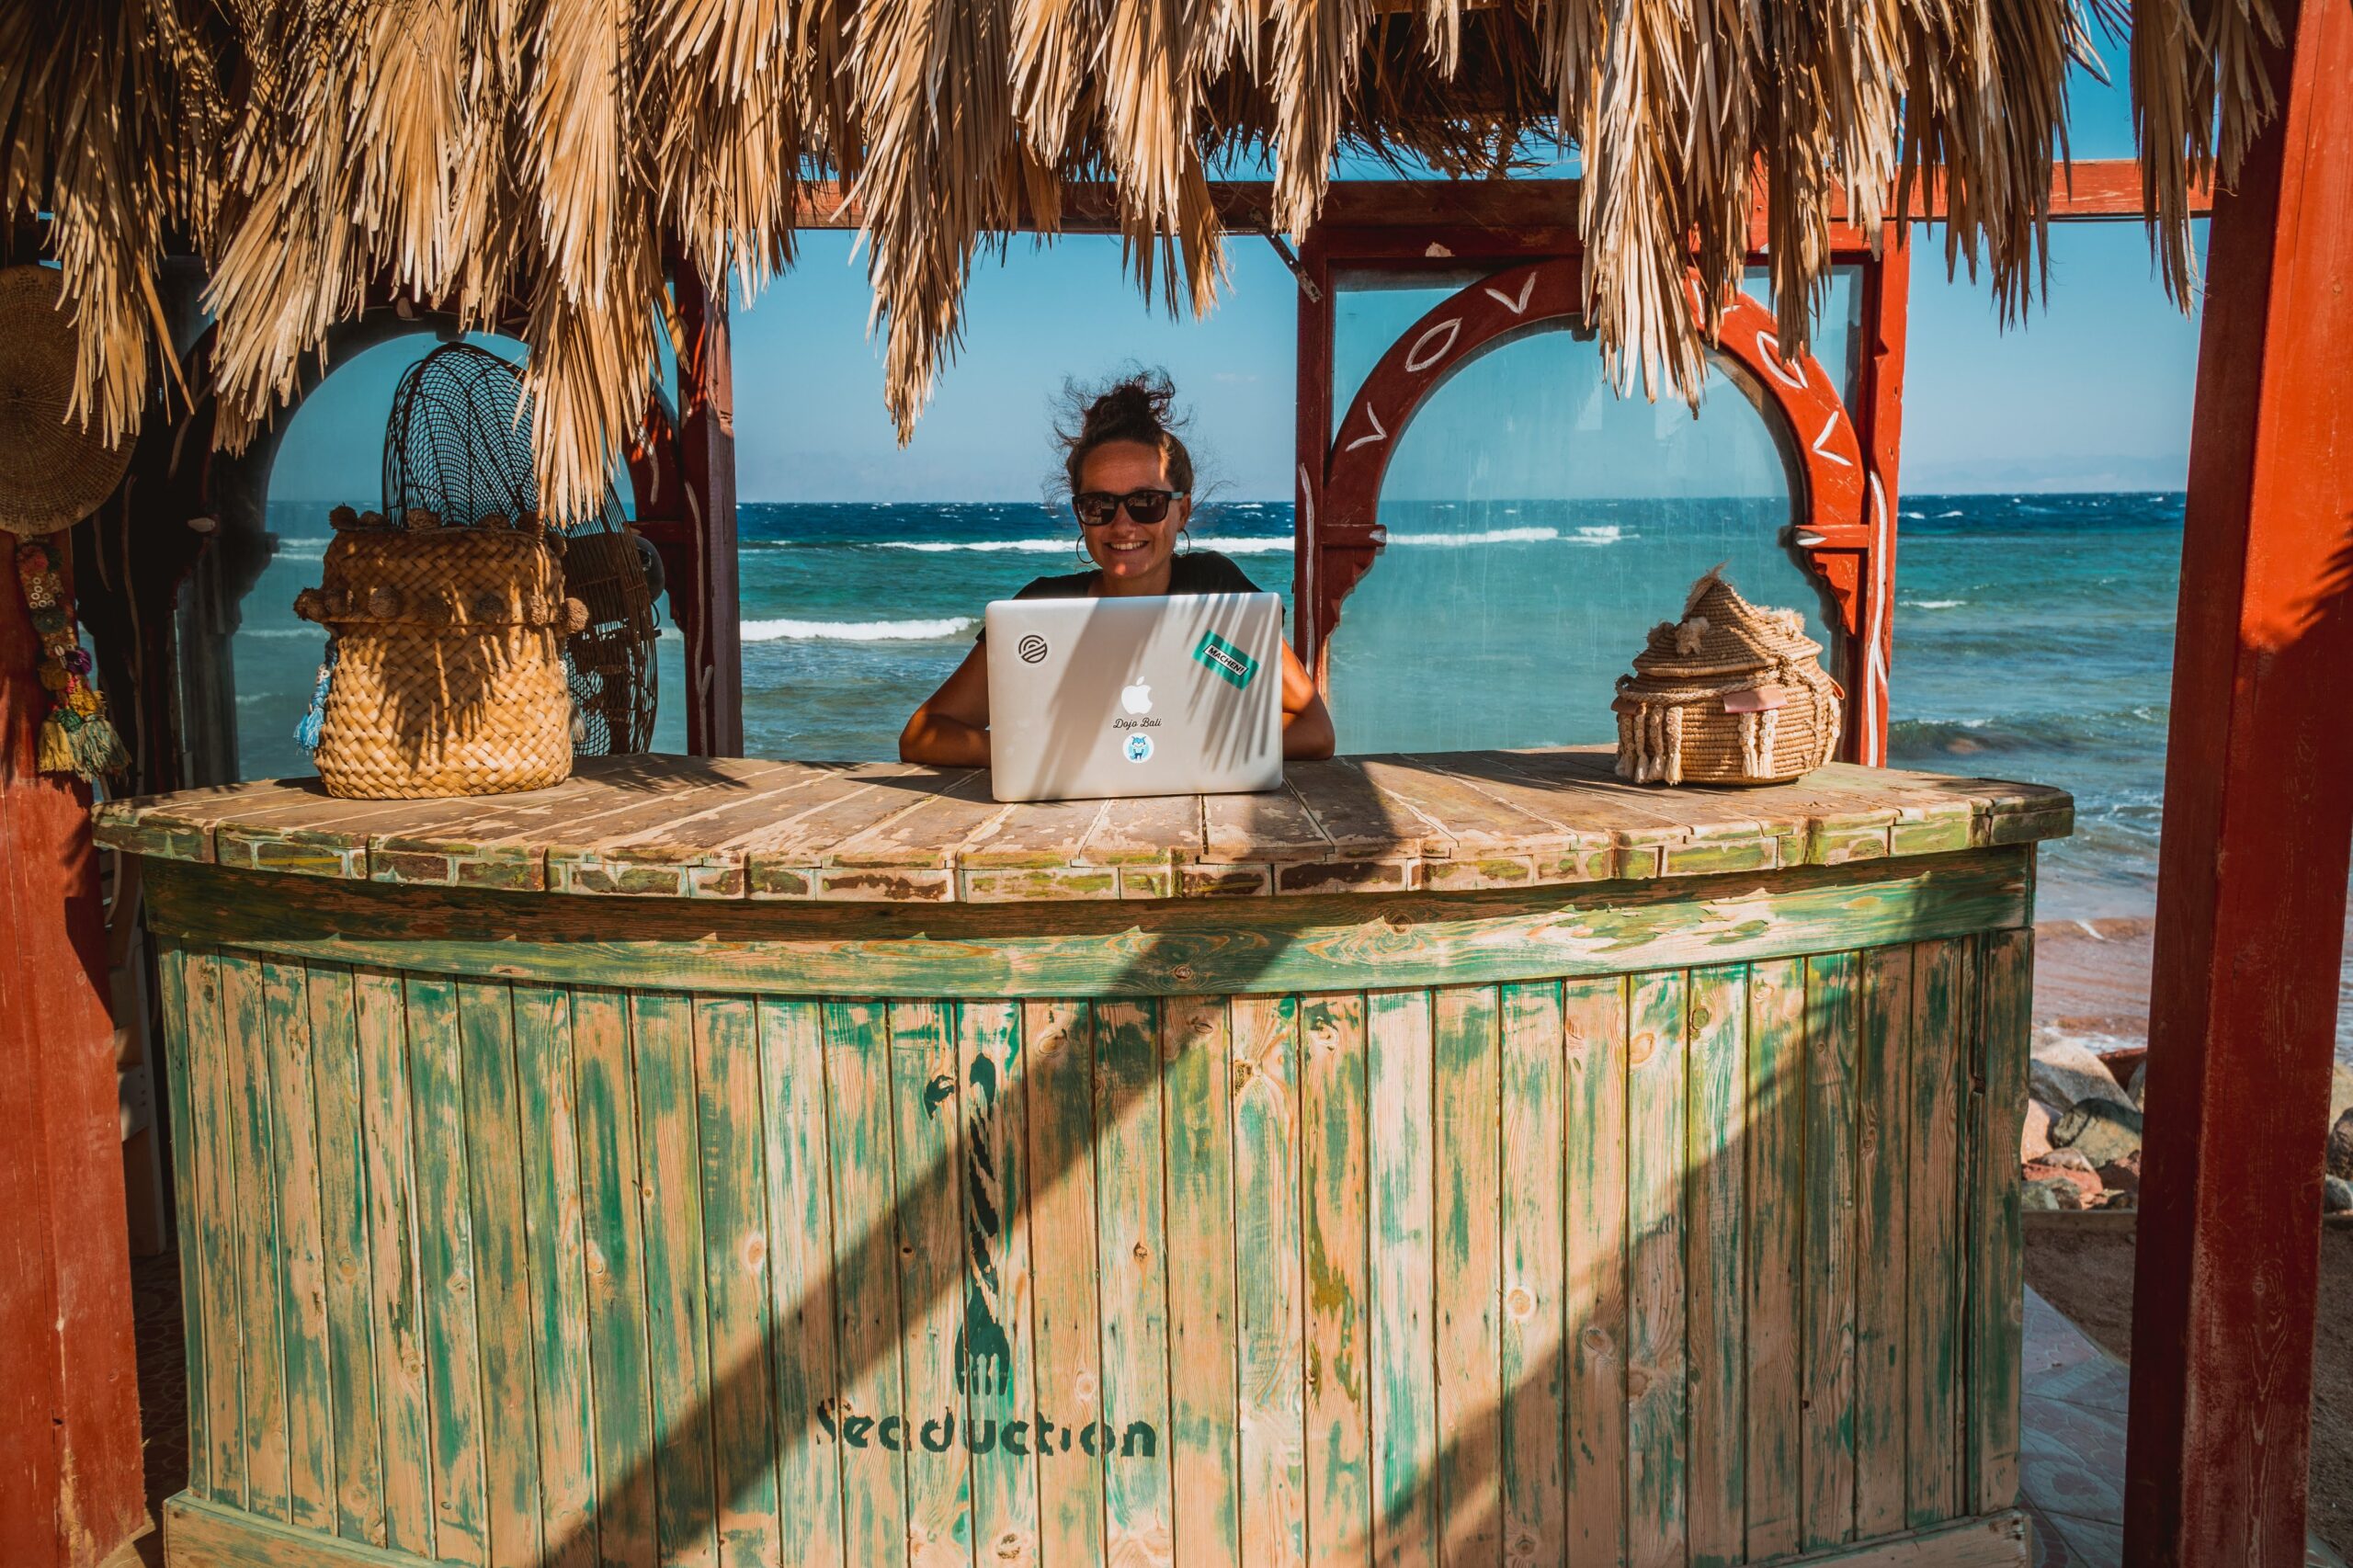 digital nomad woman working on the beach | Austin and Monica